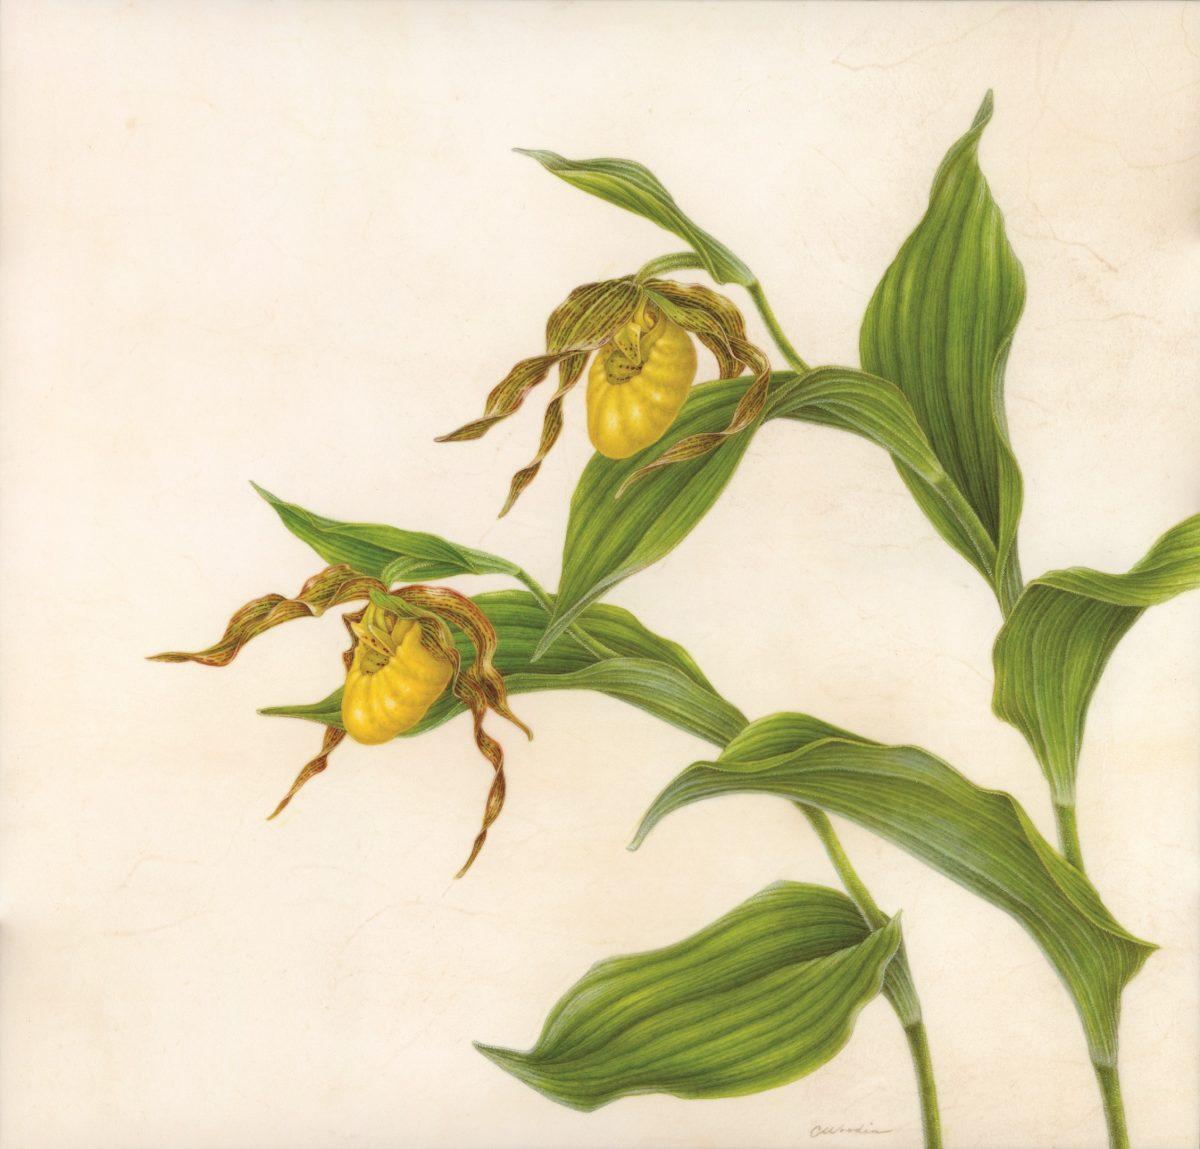 "Yellow Lady's Slipper (Cypripedium parviflorum var. pubescens)," 2017, by Carol Woodin. Watercolor on vellum over panel, 15 inches by 15 1/2 inches. (Carol Woodin)